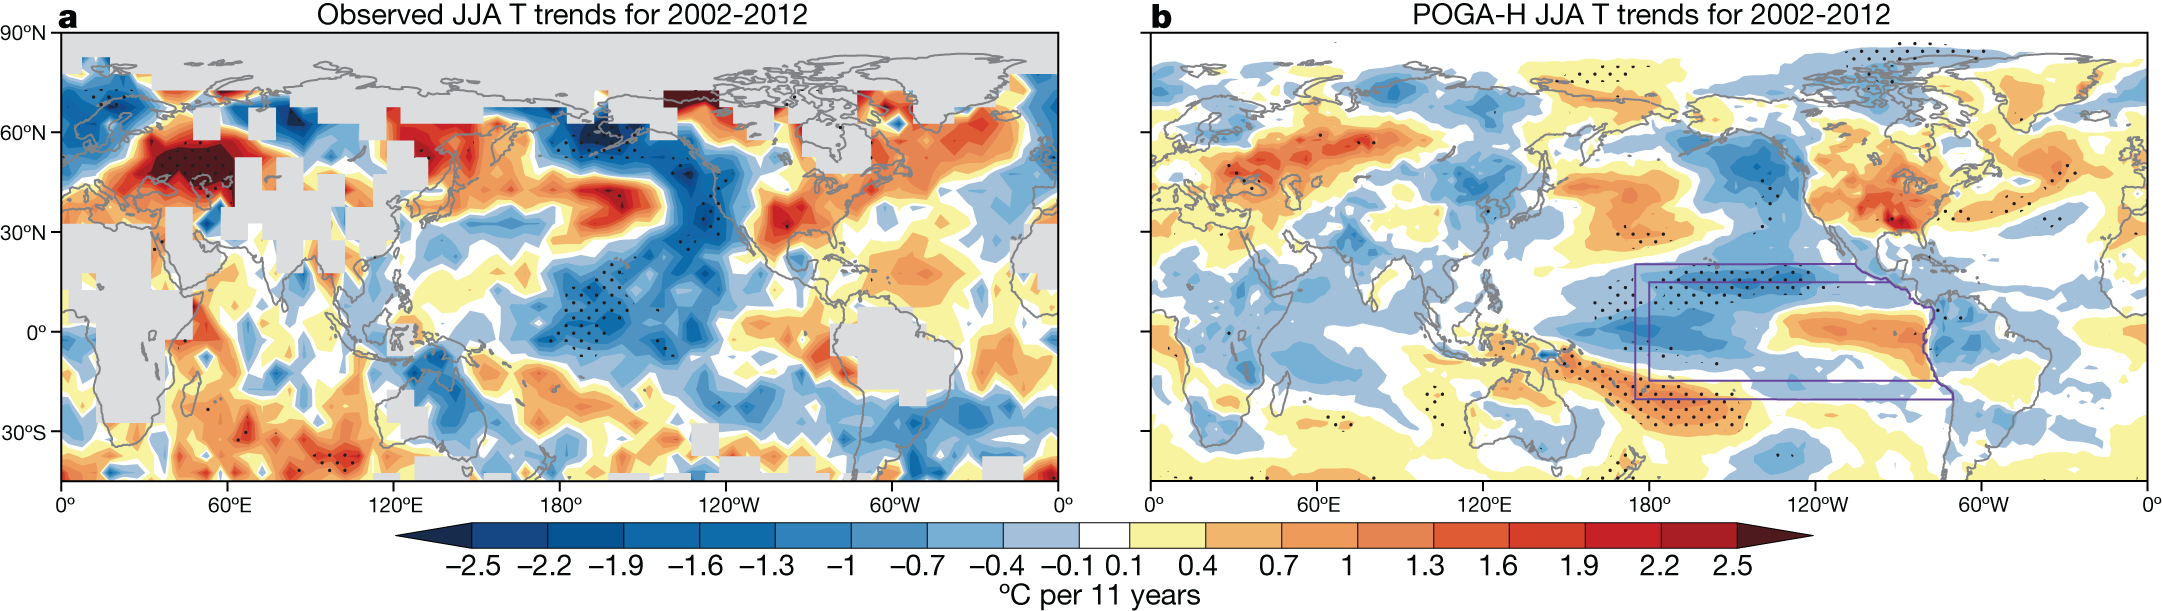  Simulated temperature trend patterns (right) created by climate modelers at Scripps Institution of Oceanography, UC San Diego, showed strong agreement to observed boreal summer temperatures (left) for 2002-2012. JJA stands for June July August. Image courtesy of Nature